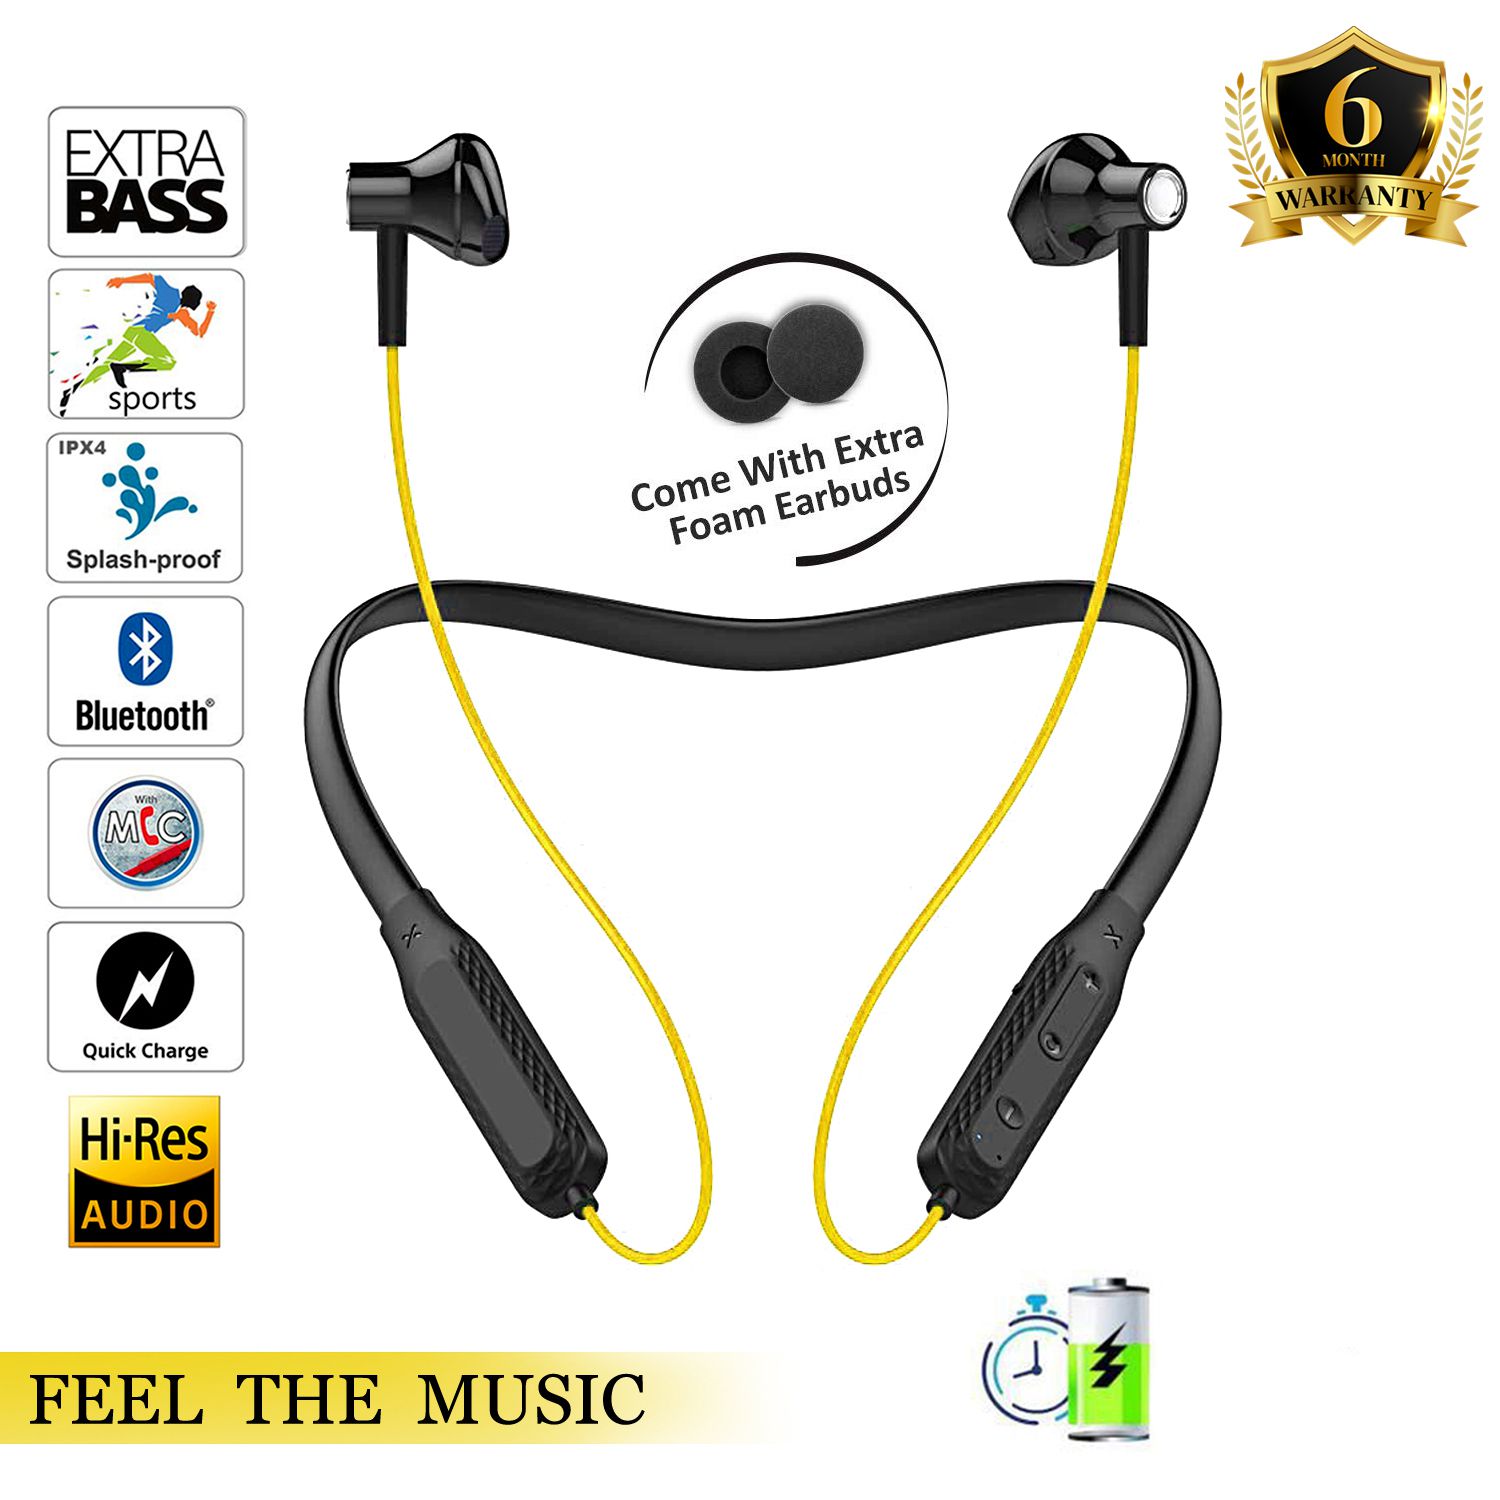 TUNE AUDIO SIXER 4D BASS 20 HOURS MUSIC PLAYBACK IPX4 4D SOUND EFFECT SPORT Bluetooth headphone / Bluetooth earphone Magnetic, NECKBAND, HEADPHONE, FOR TUNE AUDIO